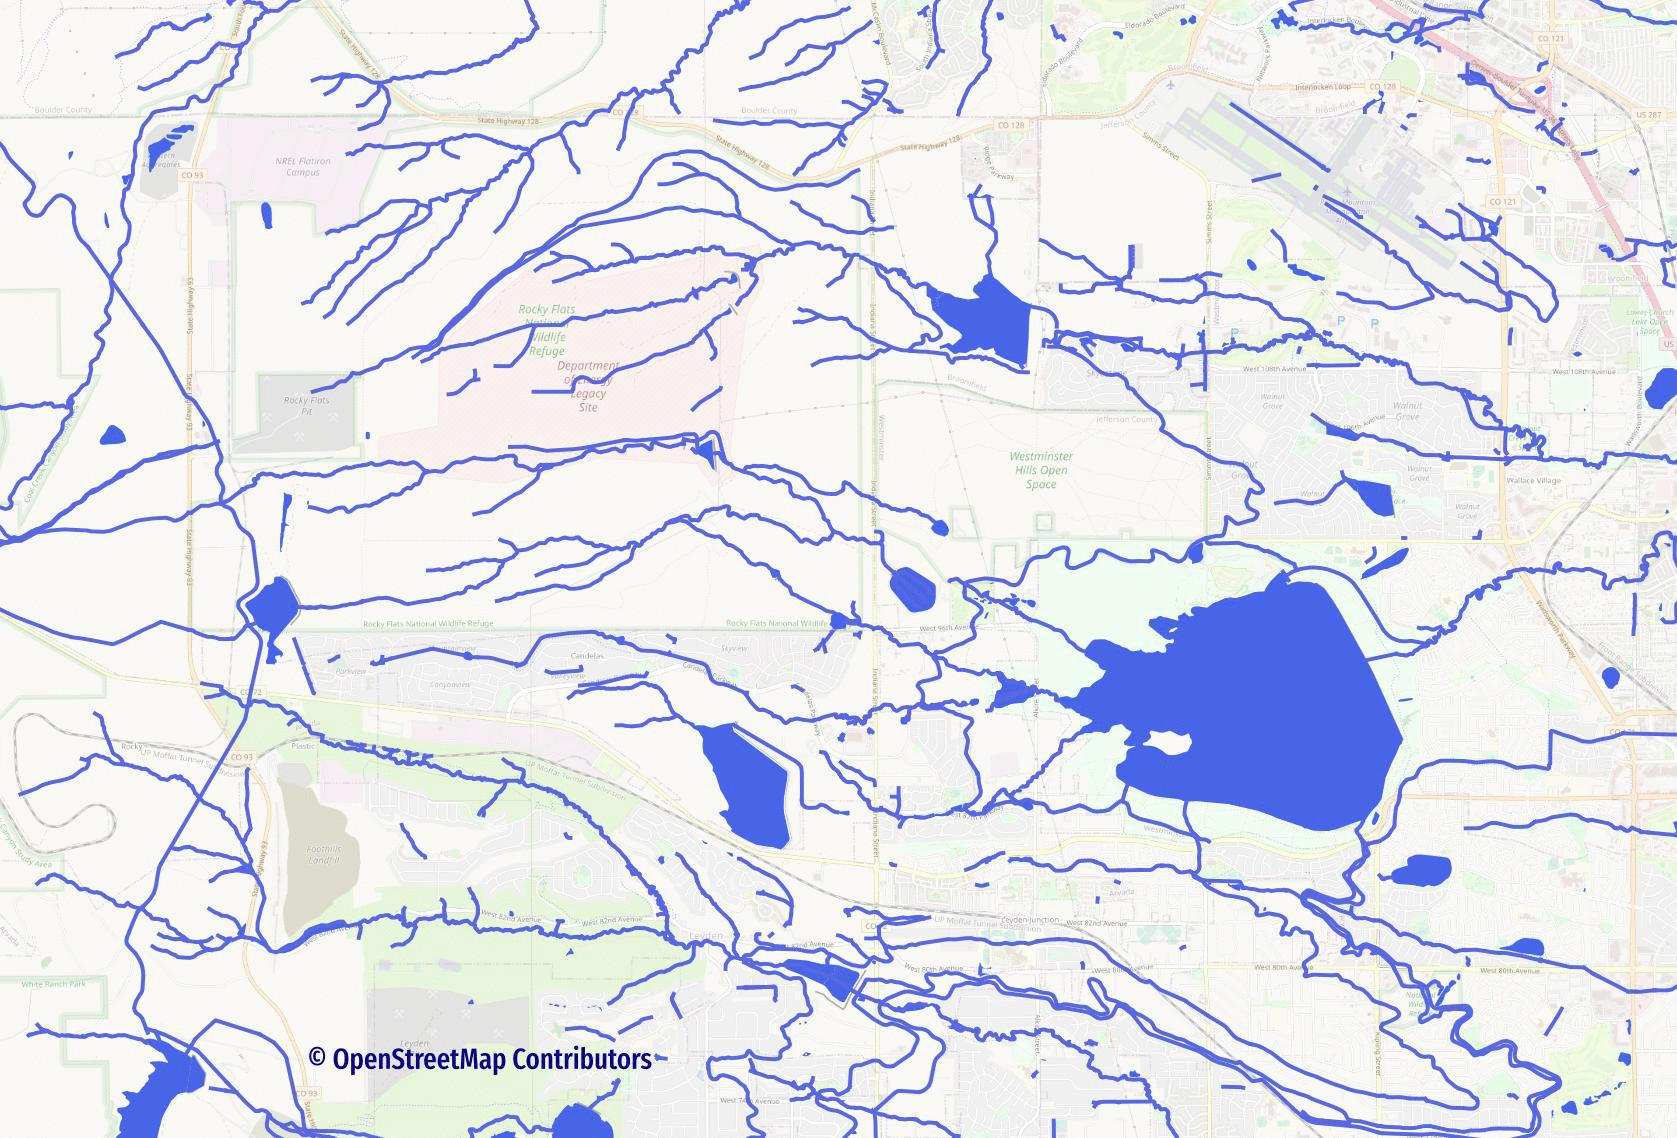 Animated image showing an area northwest of Denver, Colorado with a few large reservoirs (polygons) connected by waterways (lines).  The animation shows the impact of taking these large polygons out of the routing equation, many important route options disappear.